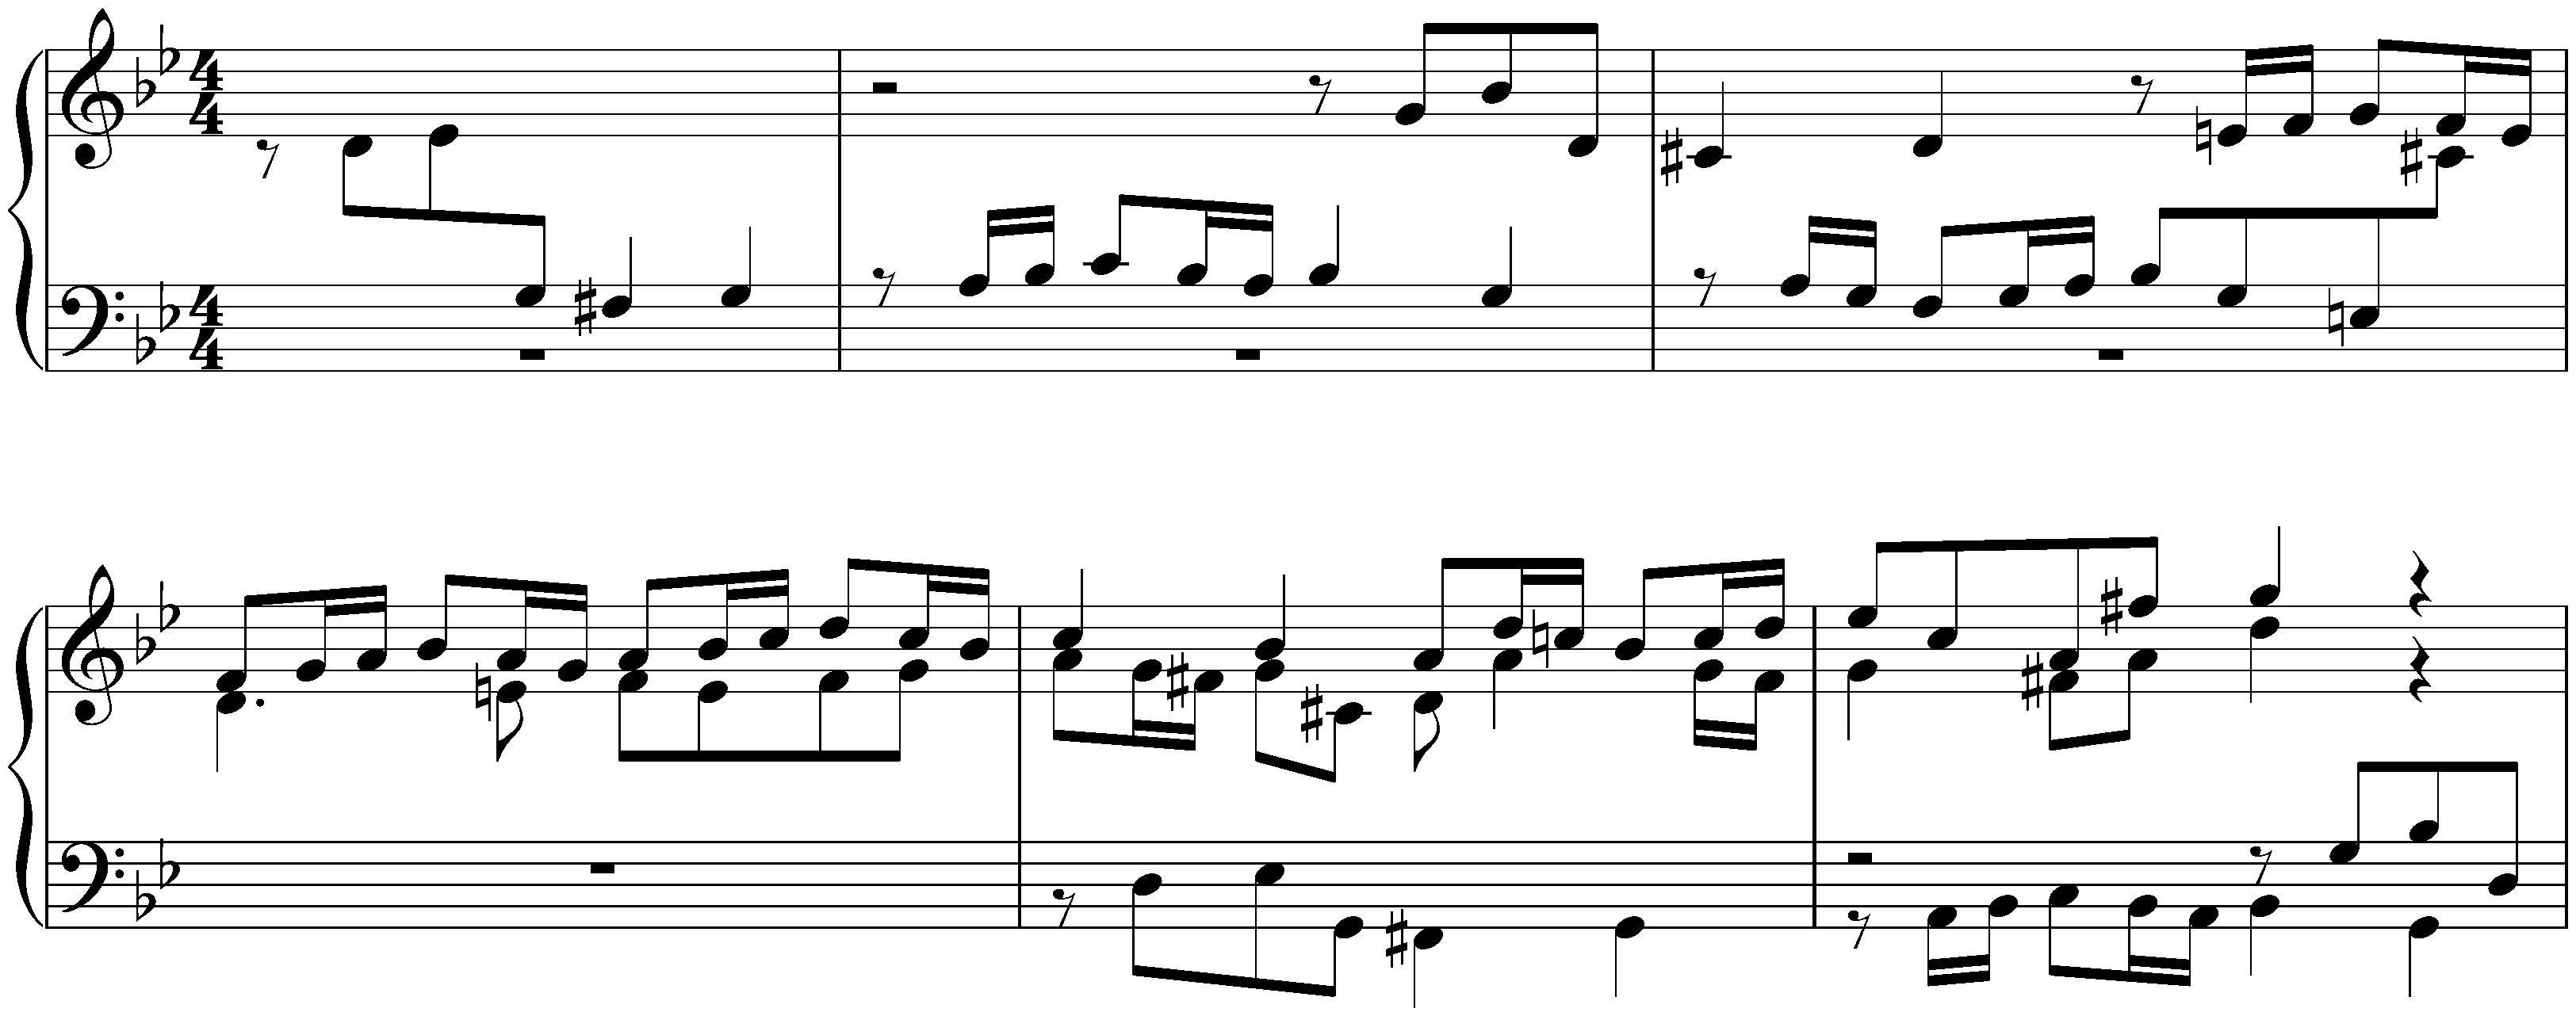 The Well-Tempered Clavier, Book 1, BWV 846–869; 16. G minor, BWV 861, Fugue